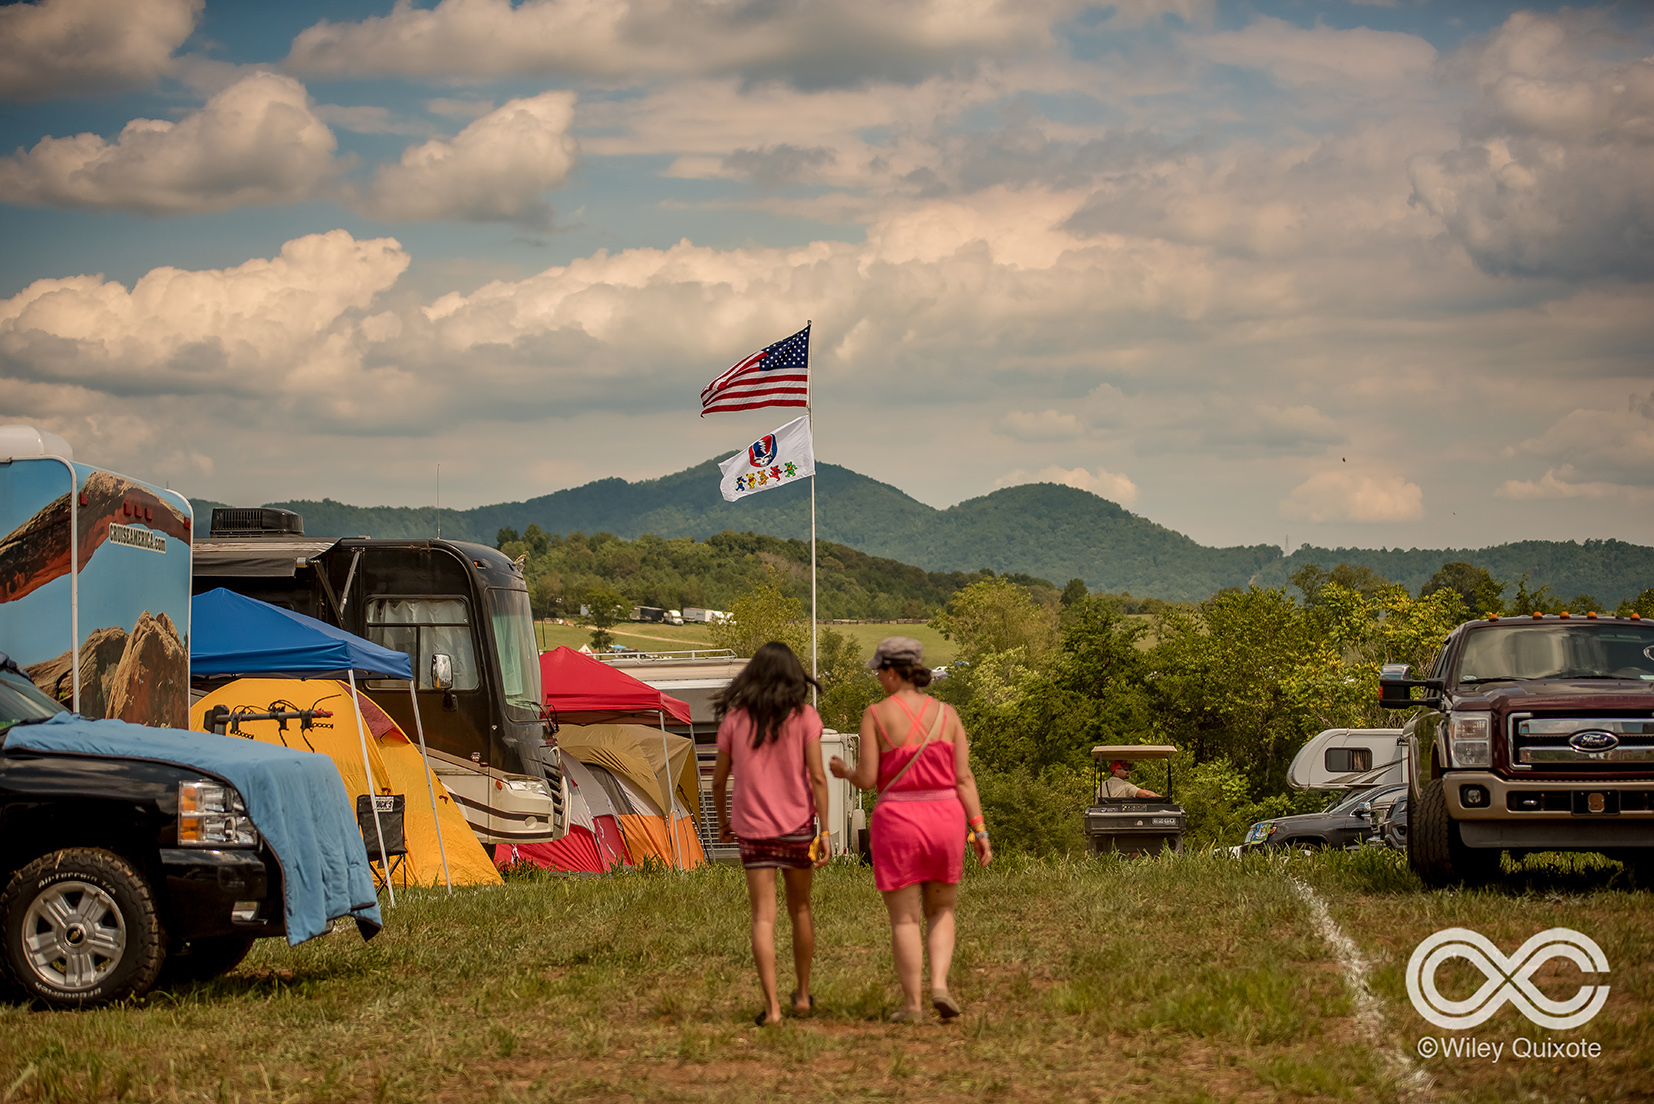 The Daytripper Experience at LOCKN’